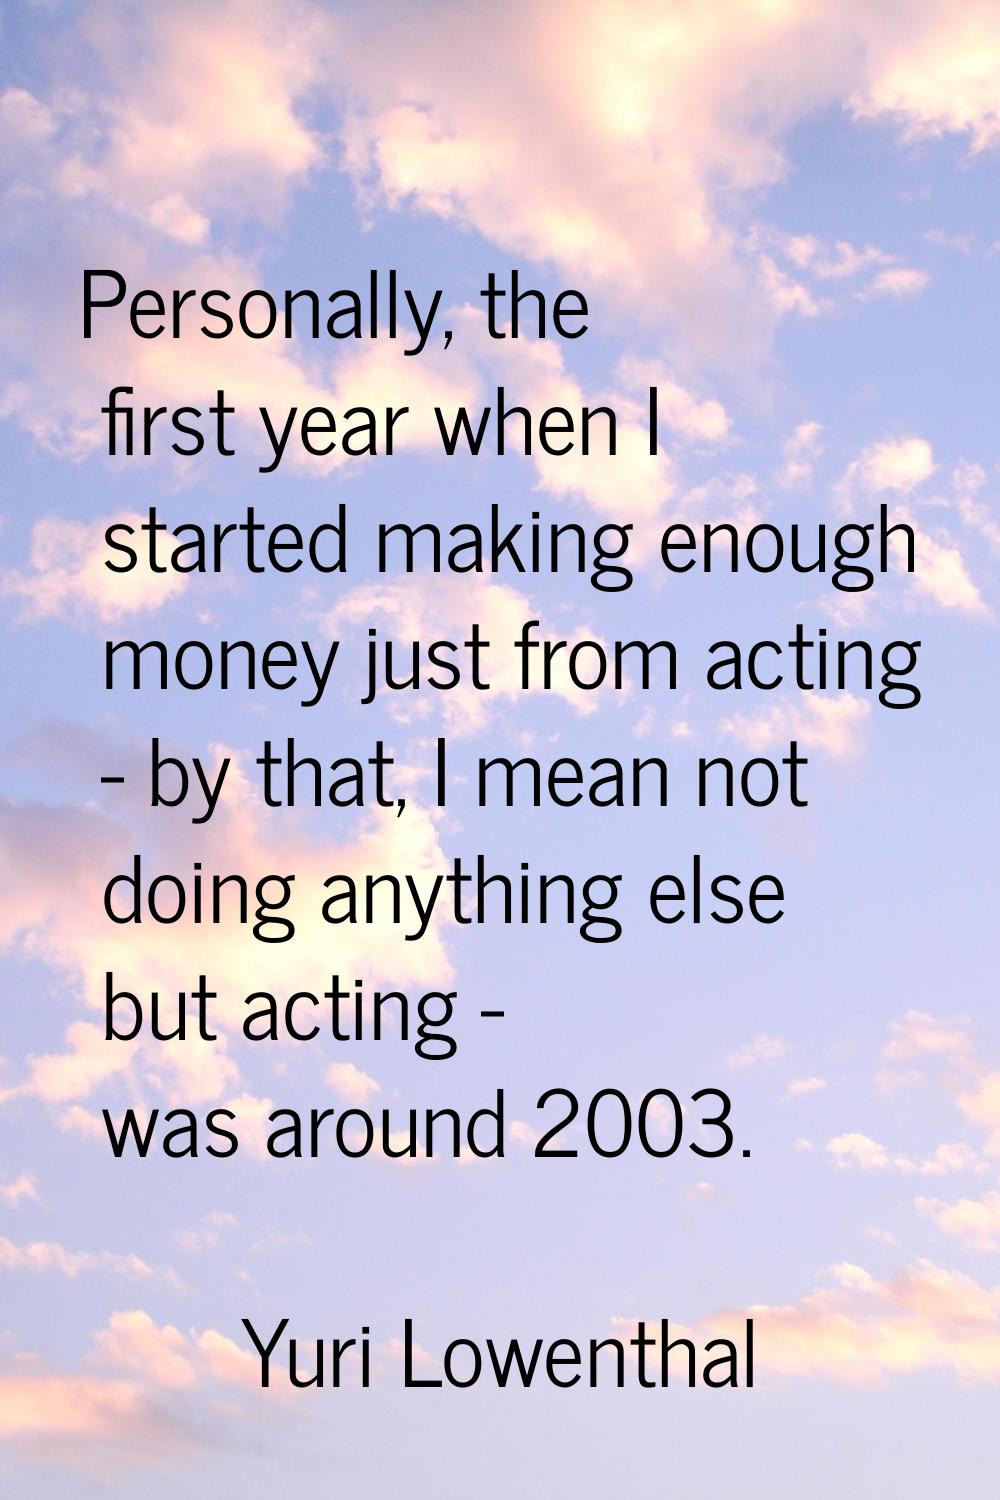 Personally, the first year when I started making enough money just from acting - by that, I mean no